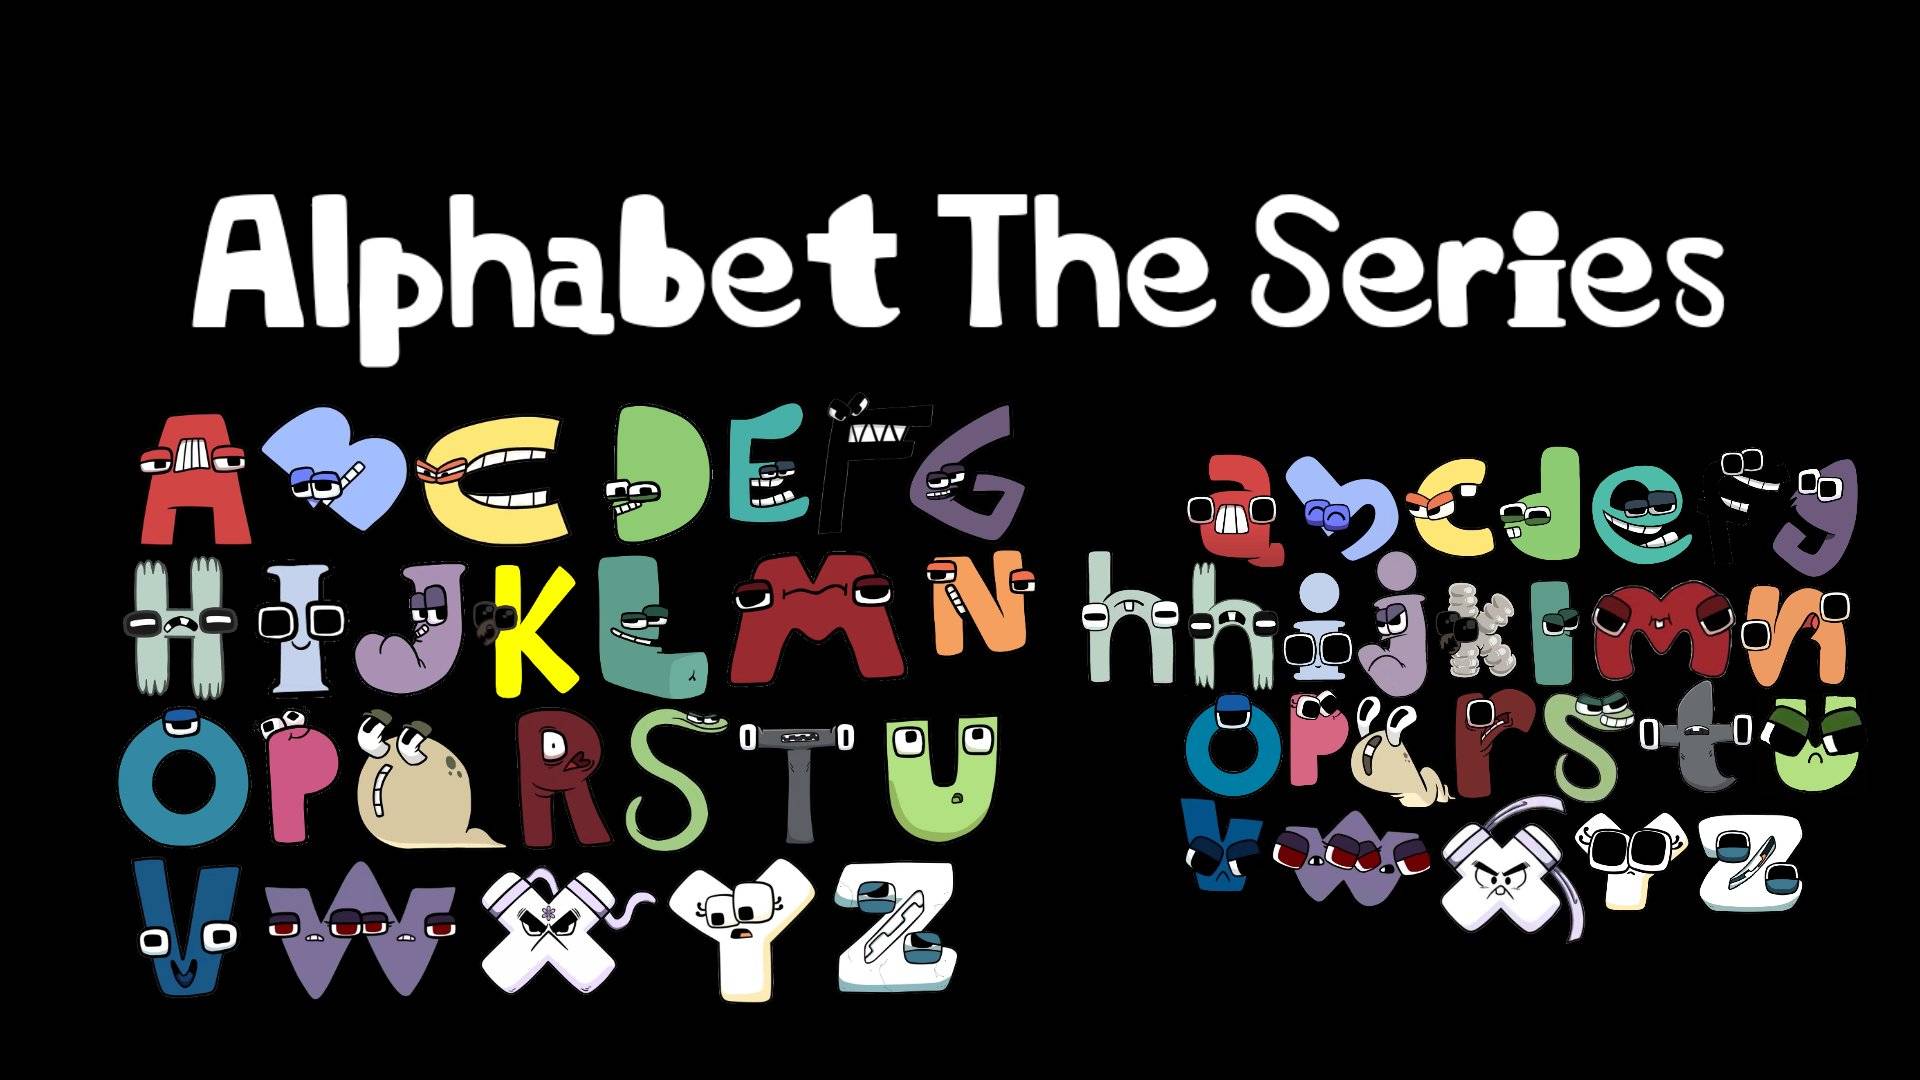 Repeqecatian Alphabet Lore Fanmade By Thebobby65 by